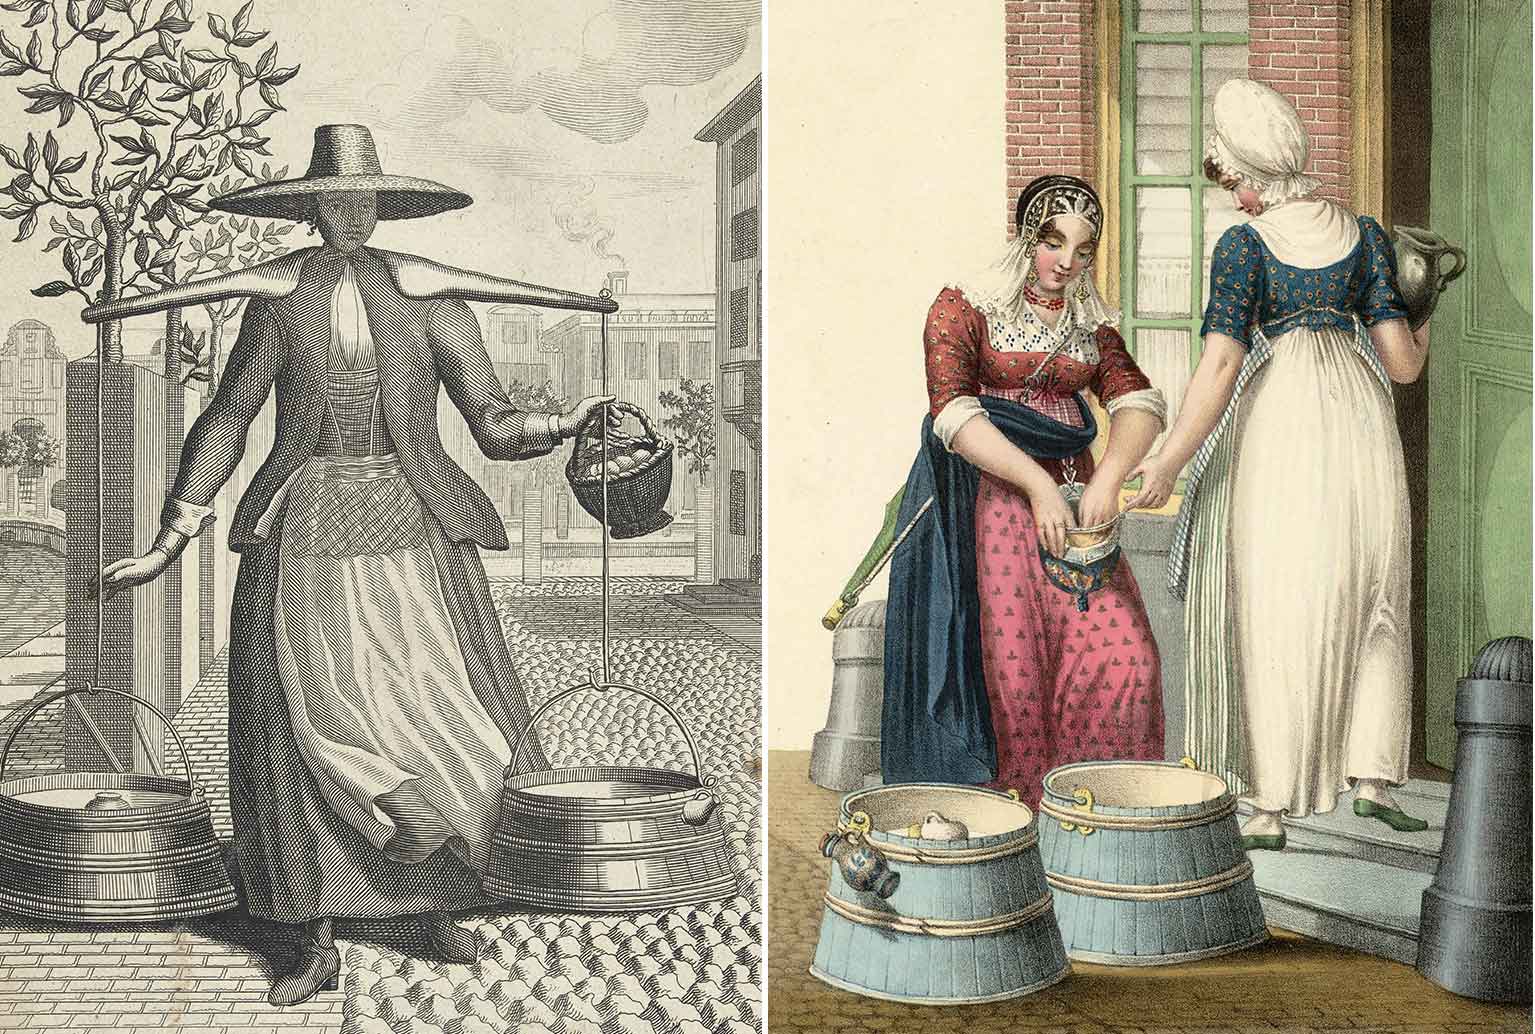 Waterland milkmaid in Amsterdam around 1700 and milkmaid selling to an Amsterdam maid